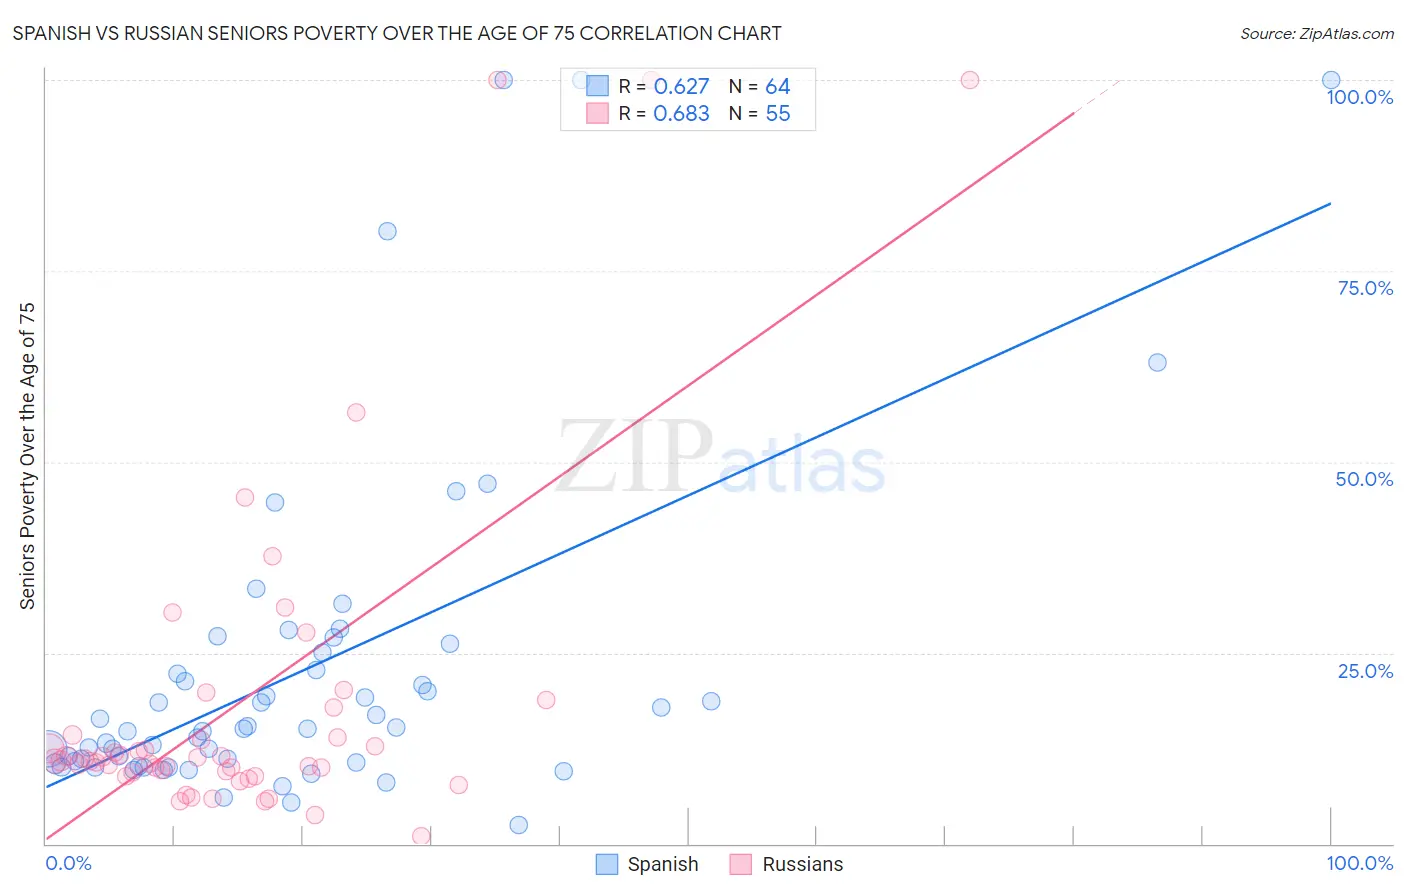 Spanish vs Russian Seniors Poverty Over the Age of 75